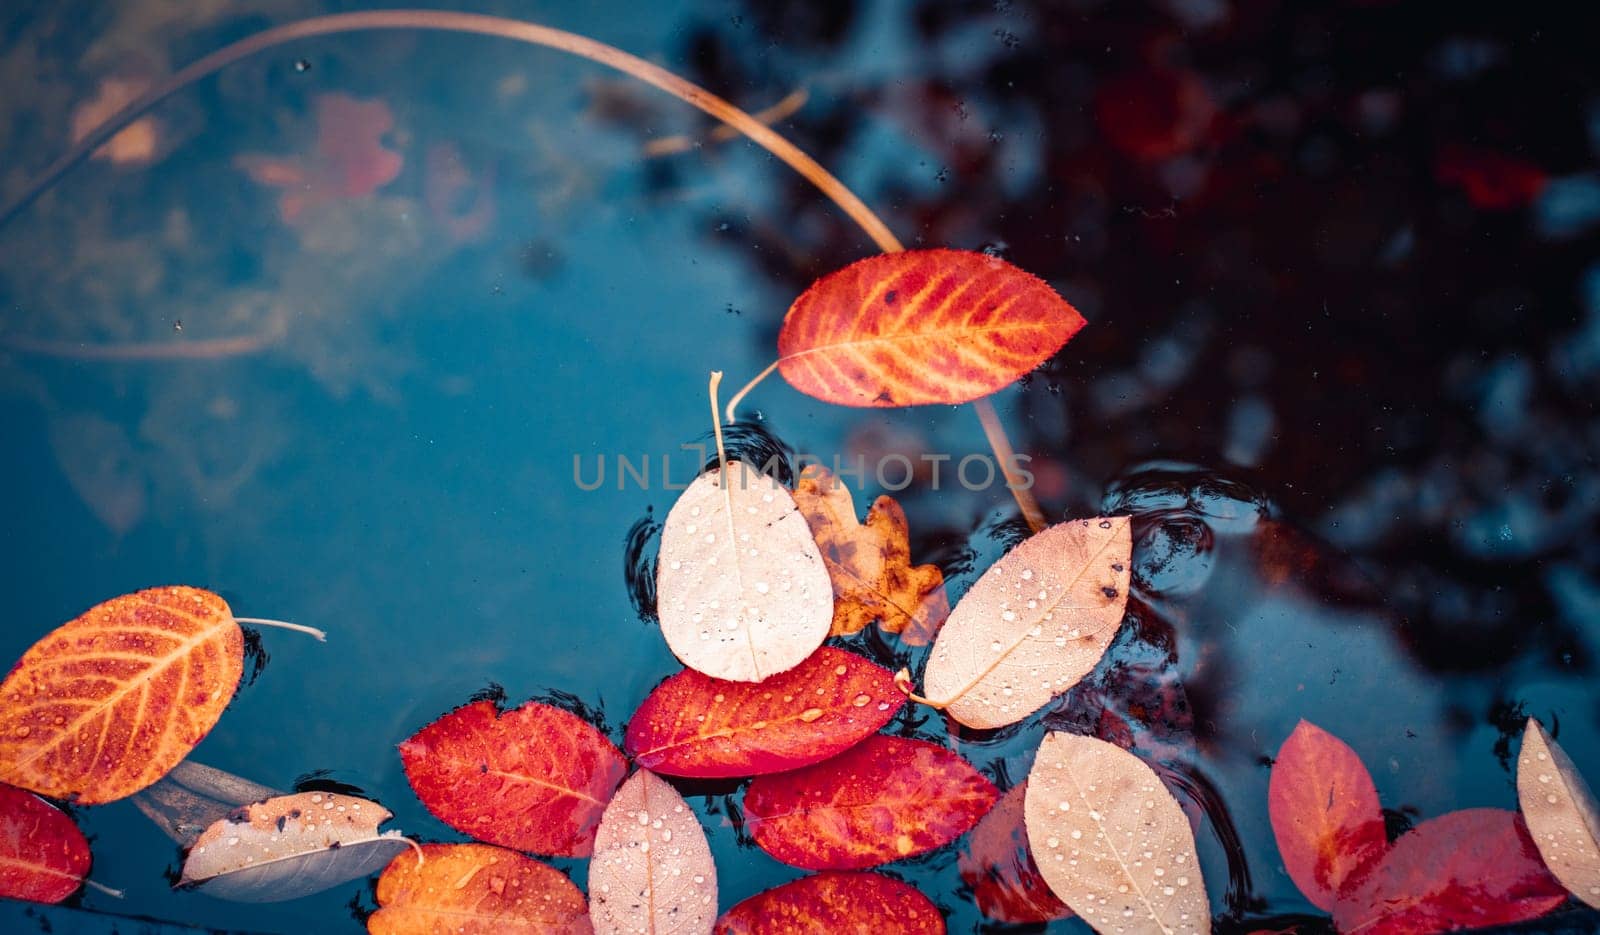 Autumnal bright yellow-orange fallen leaves in water concept photo. Autumn parkland atmosphere image, symbol of fall season. Template for design High quality picture for wallpaper, travel blog.